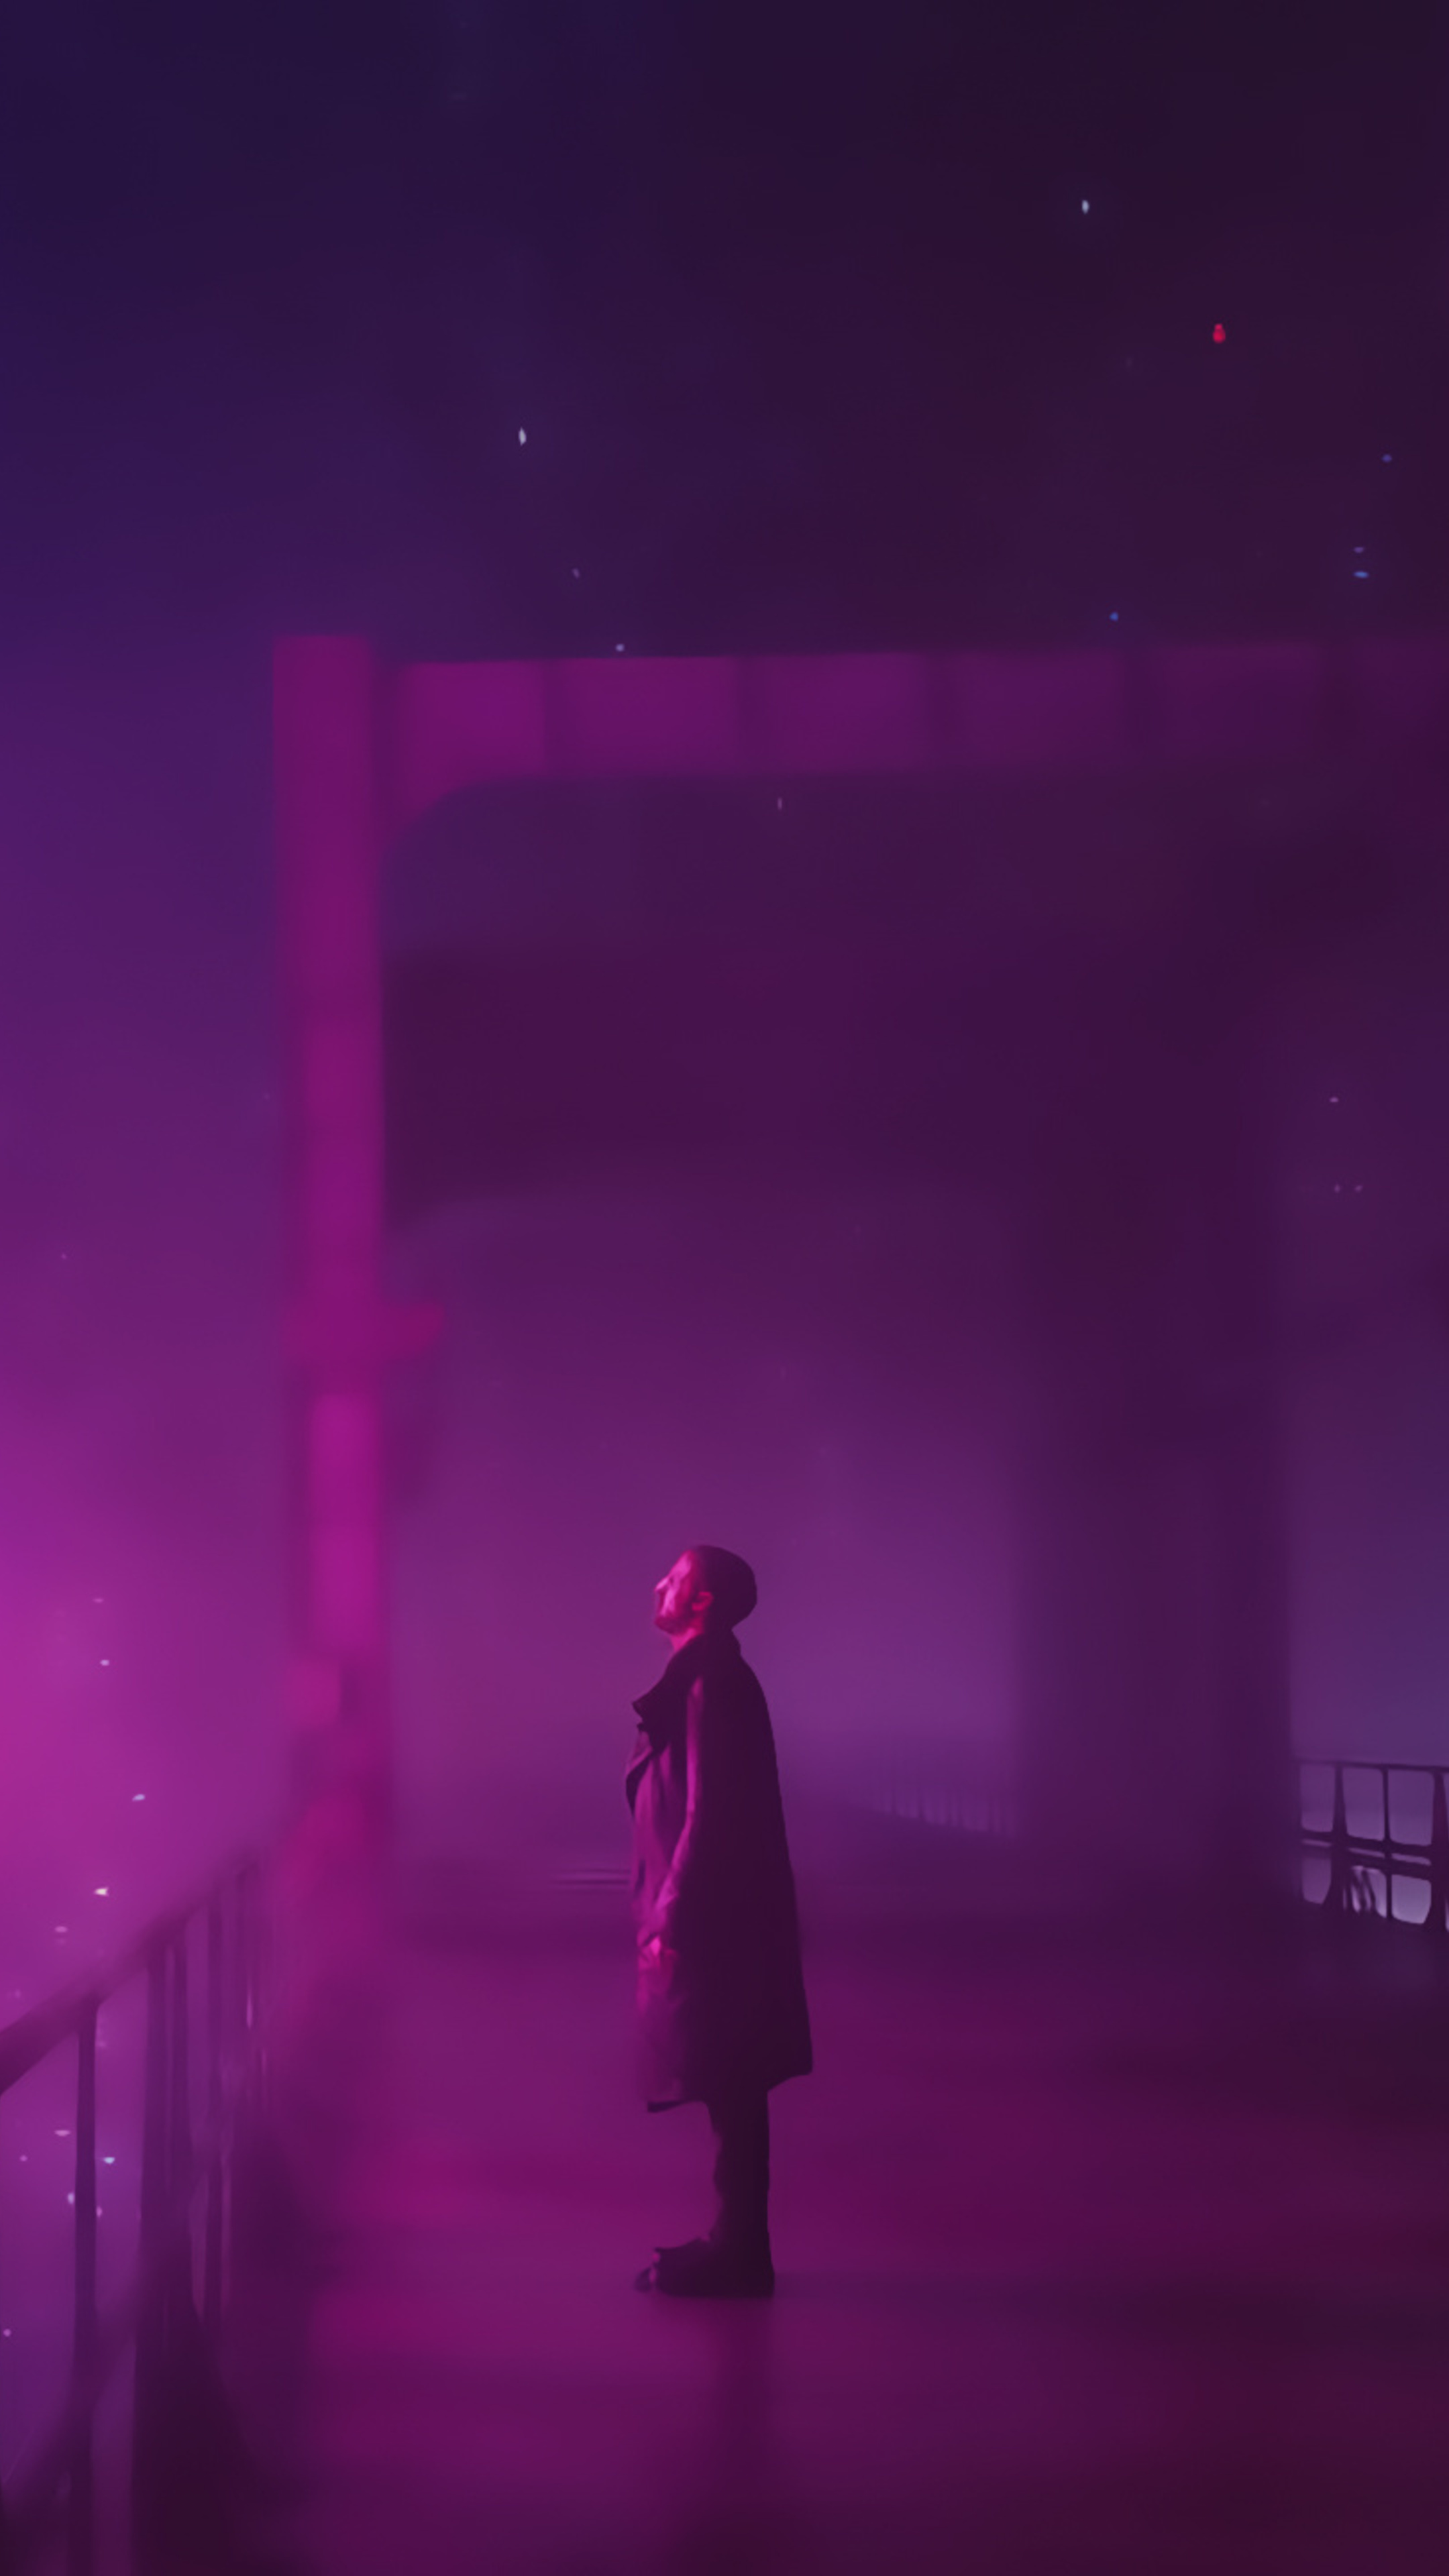 2017 Blade Runner 2049 movie, 4K Sony Xperia wallpapers, HD images, 2160x3840 4K Phone